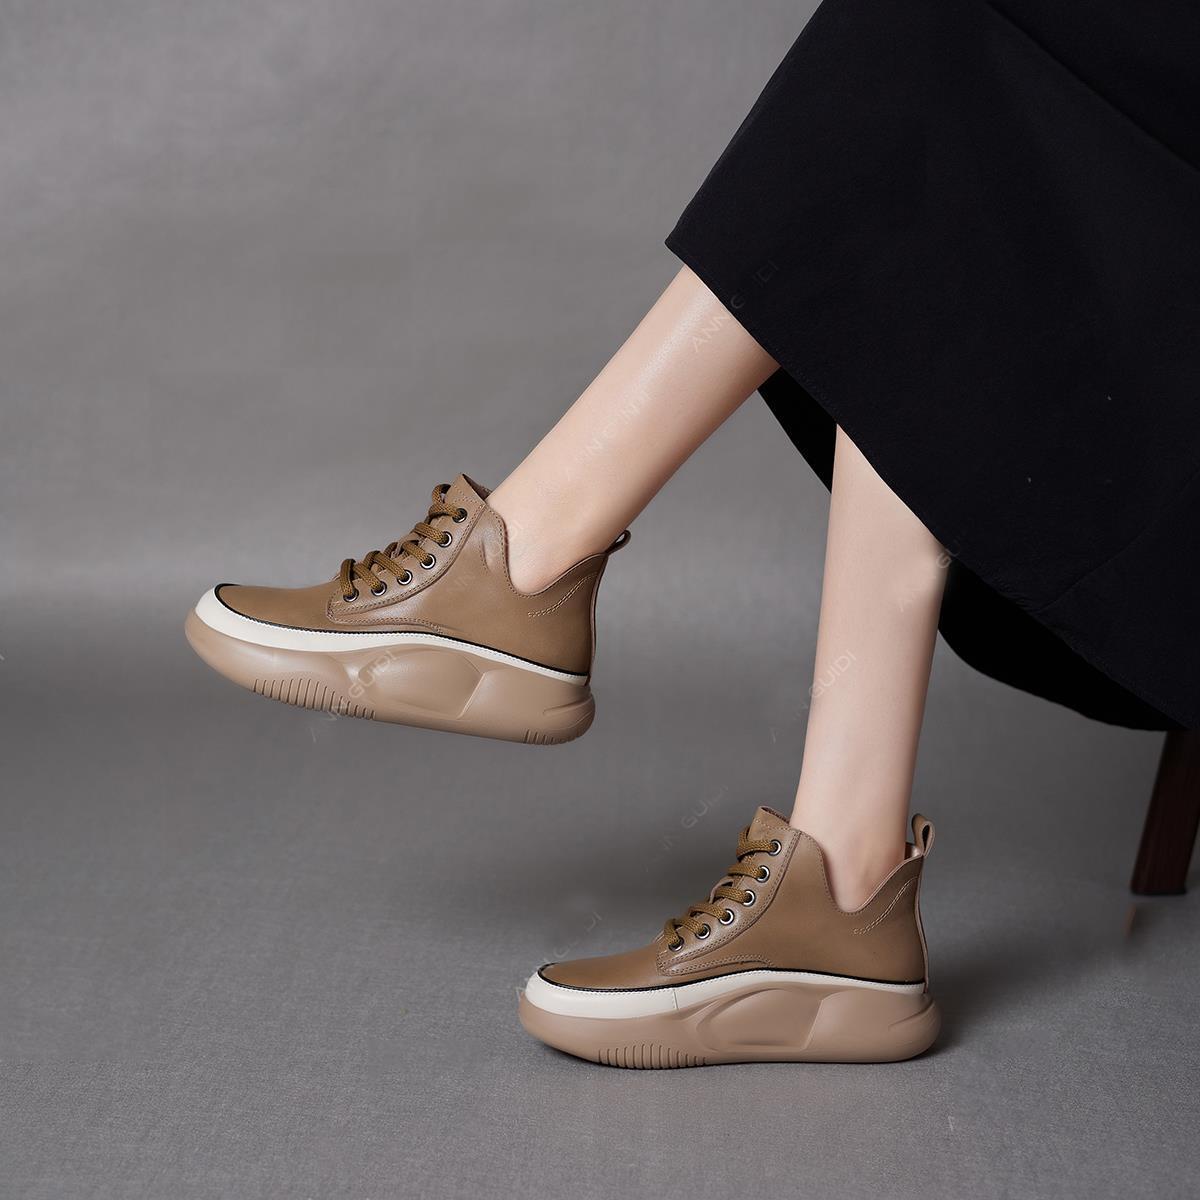 2022 New Ladies Leather Fashion Soft Sole Shoes